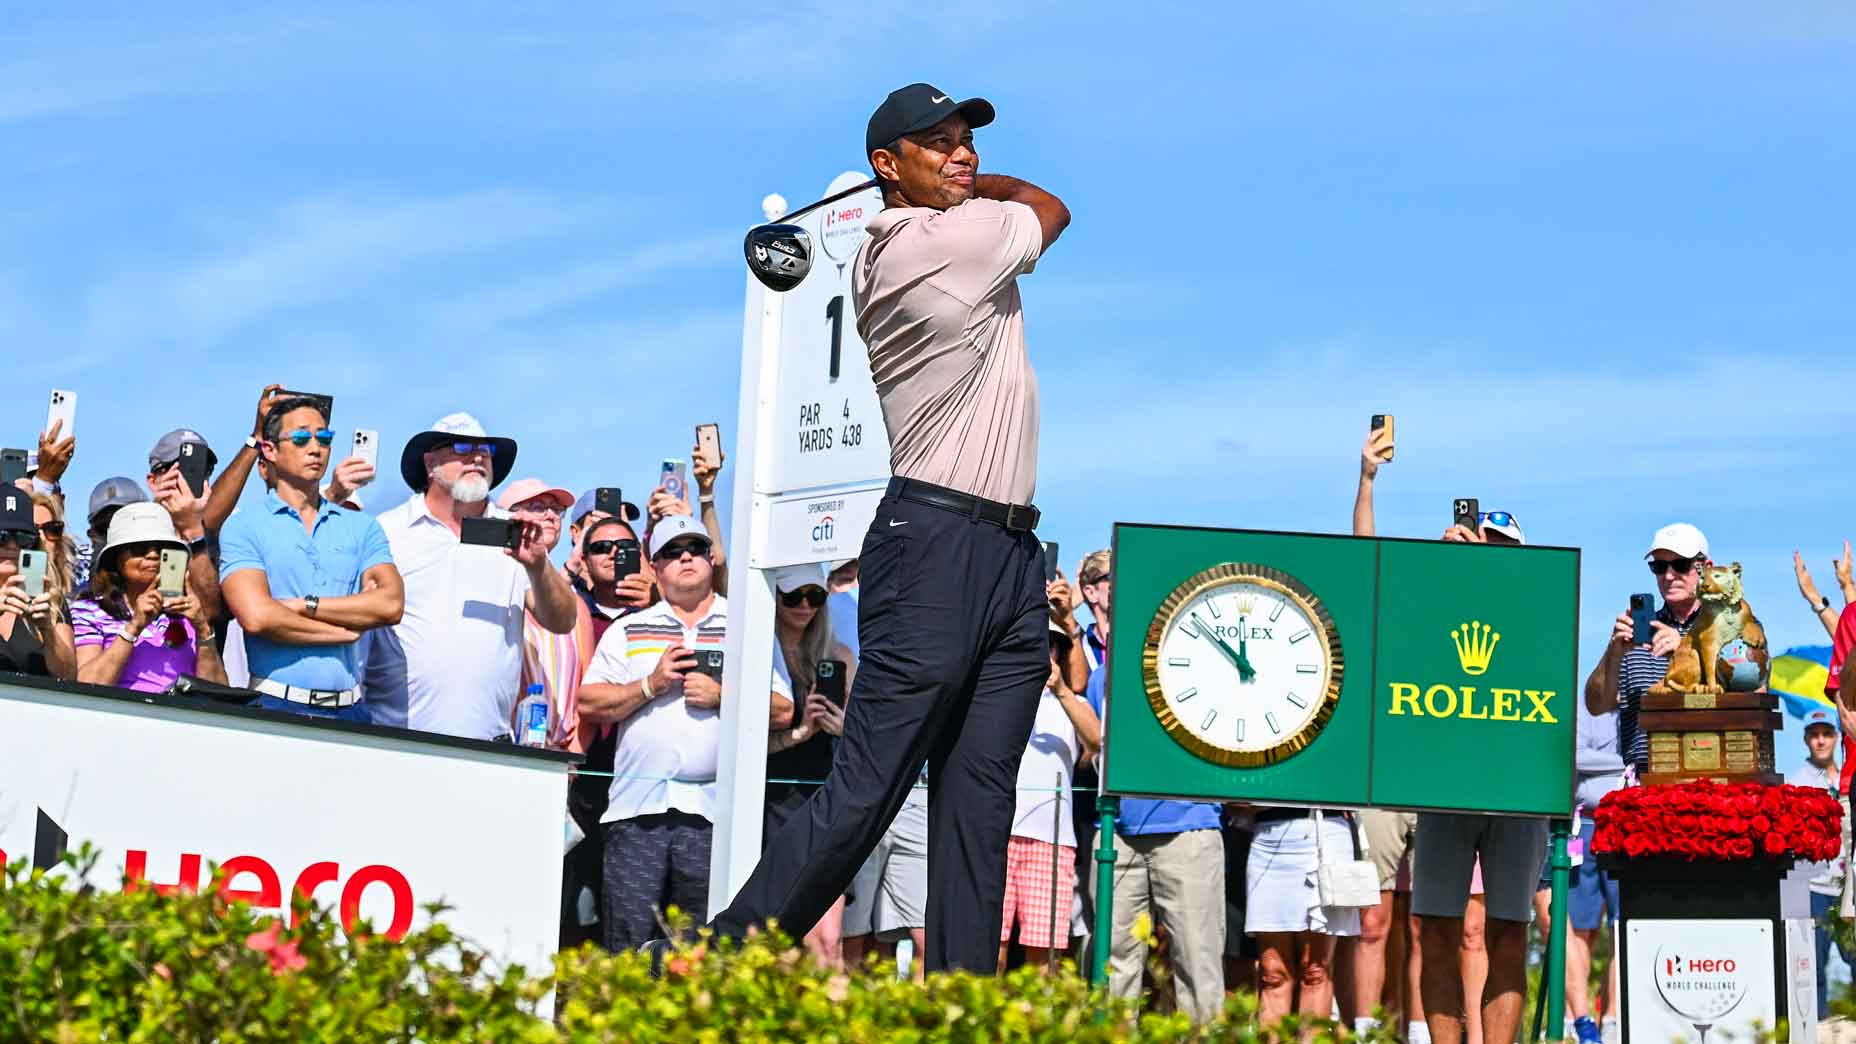 Tiger Woods plays his shot from the first tee in front of the Rolex clock as fans watch during the first round of the Hero World Challenge at Albany Golf Course on November 30, 2023 in Nassau, New Providence, Bahamas.